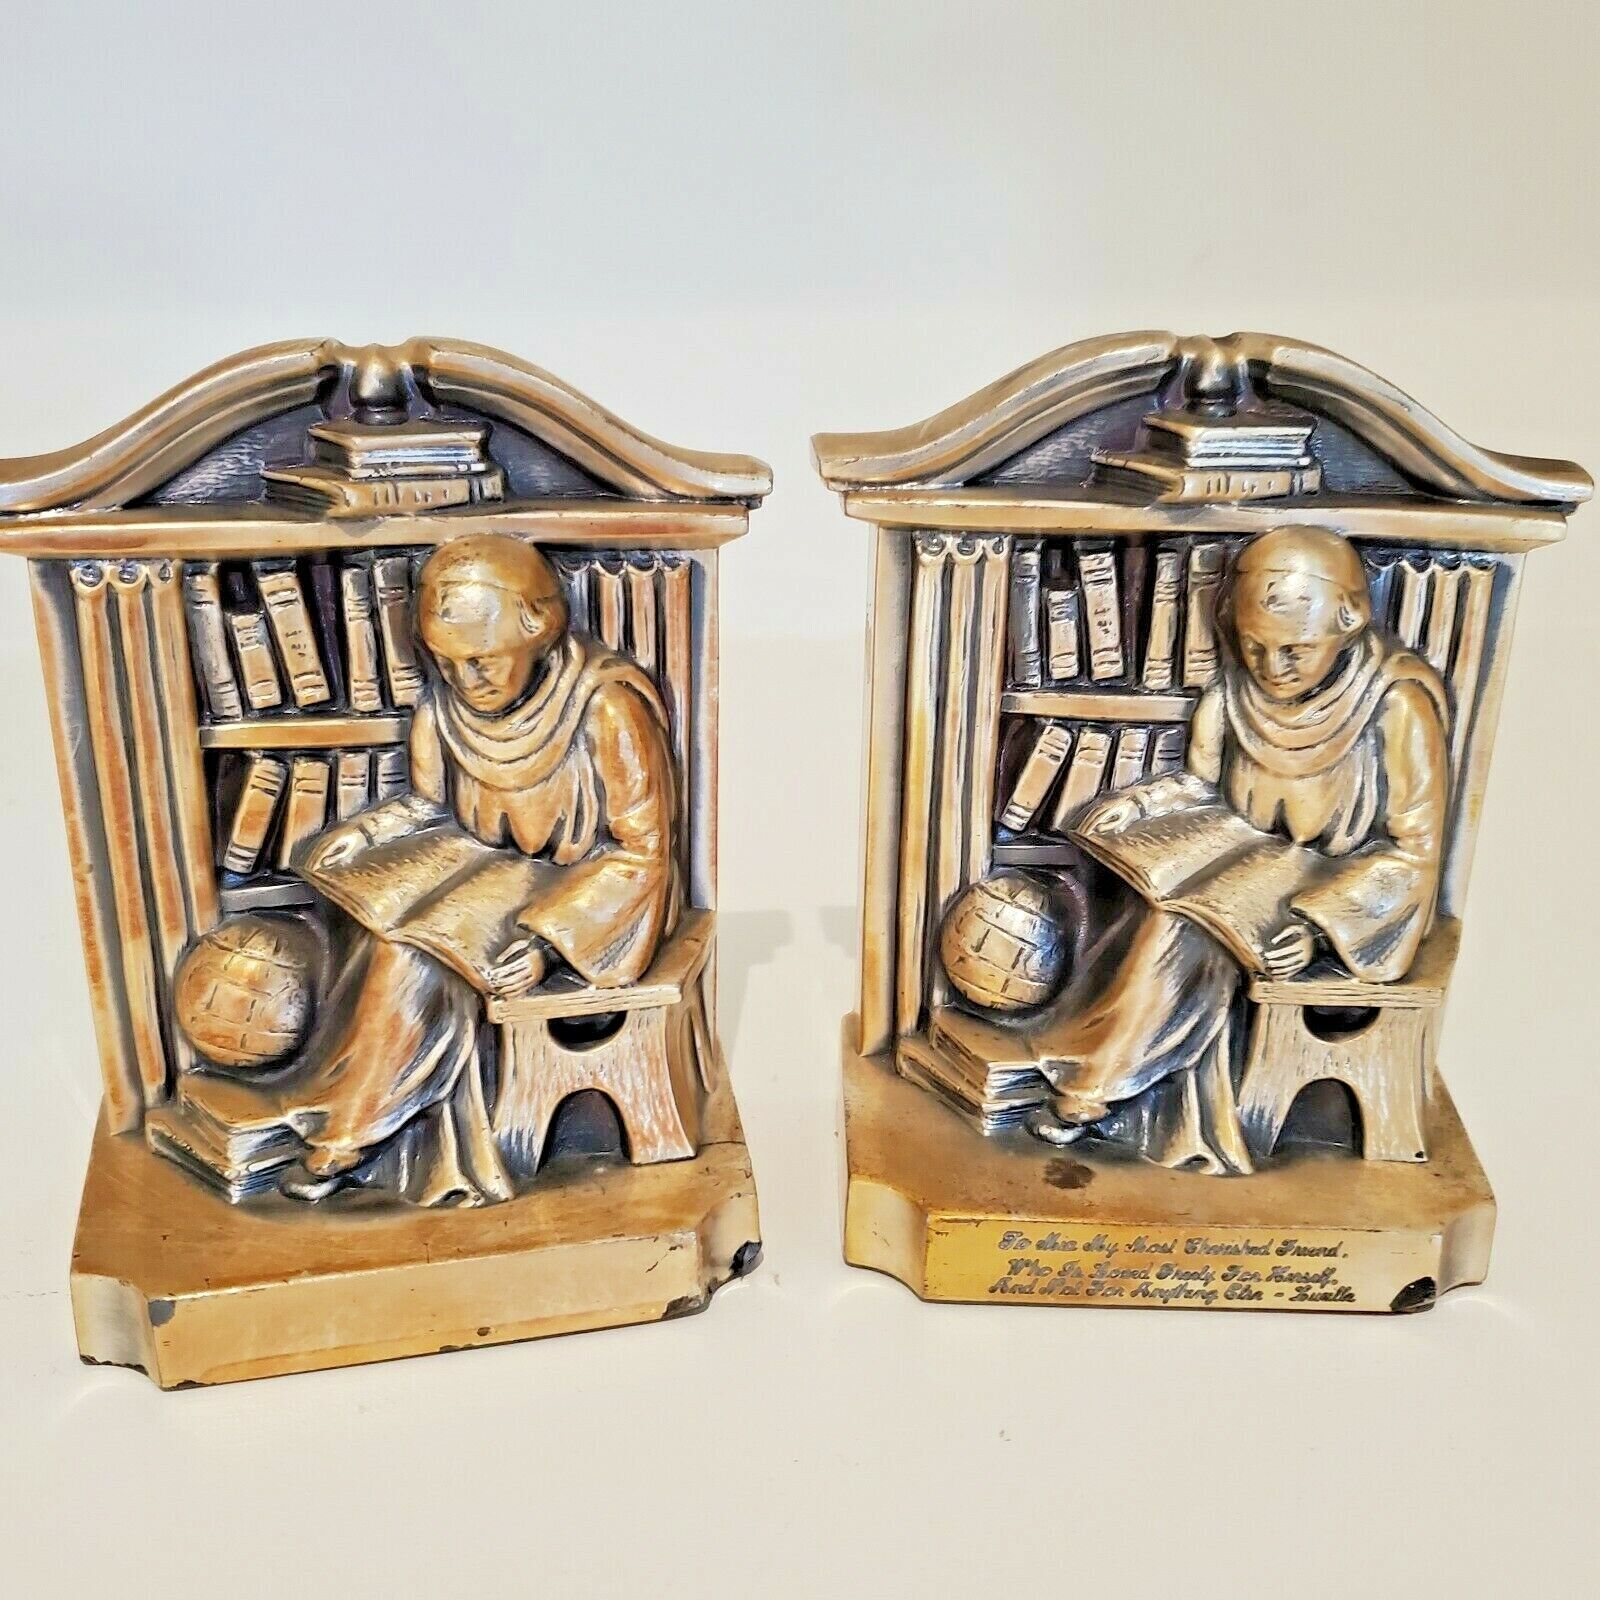 VINTAGE BRONZ BRASS BOOKENDS RELIGIOUS BISHOP/MONK READING IN LIBRARY 21B 5 INCH